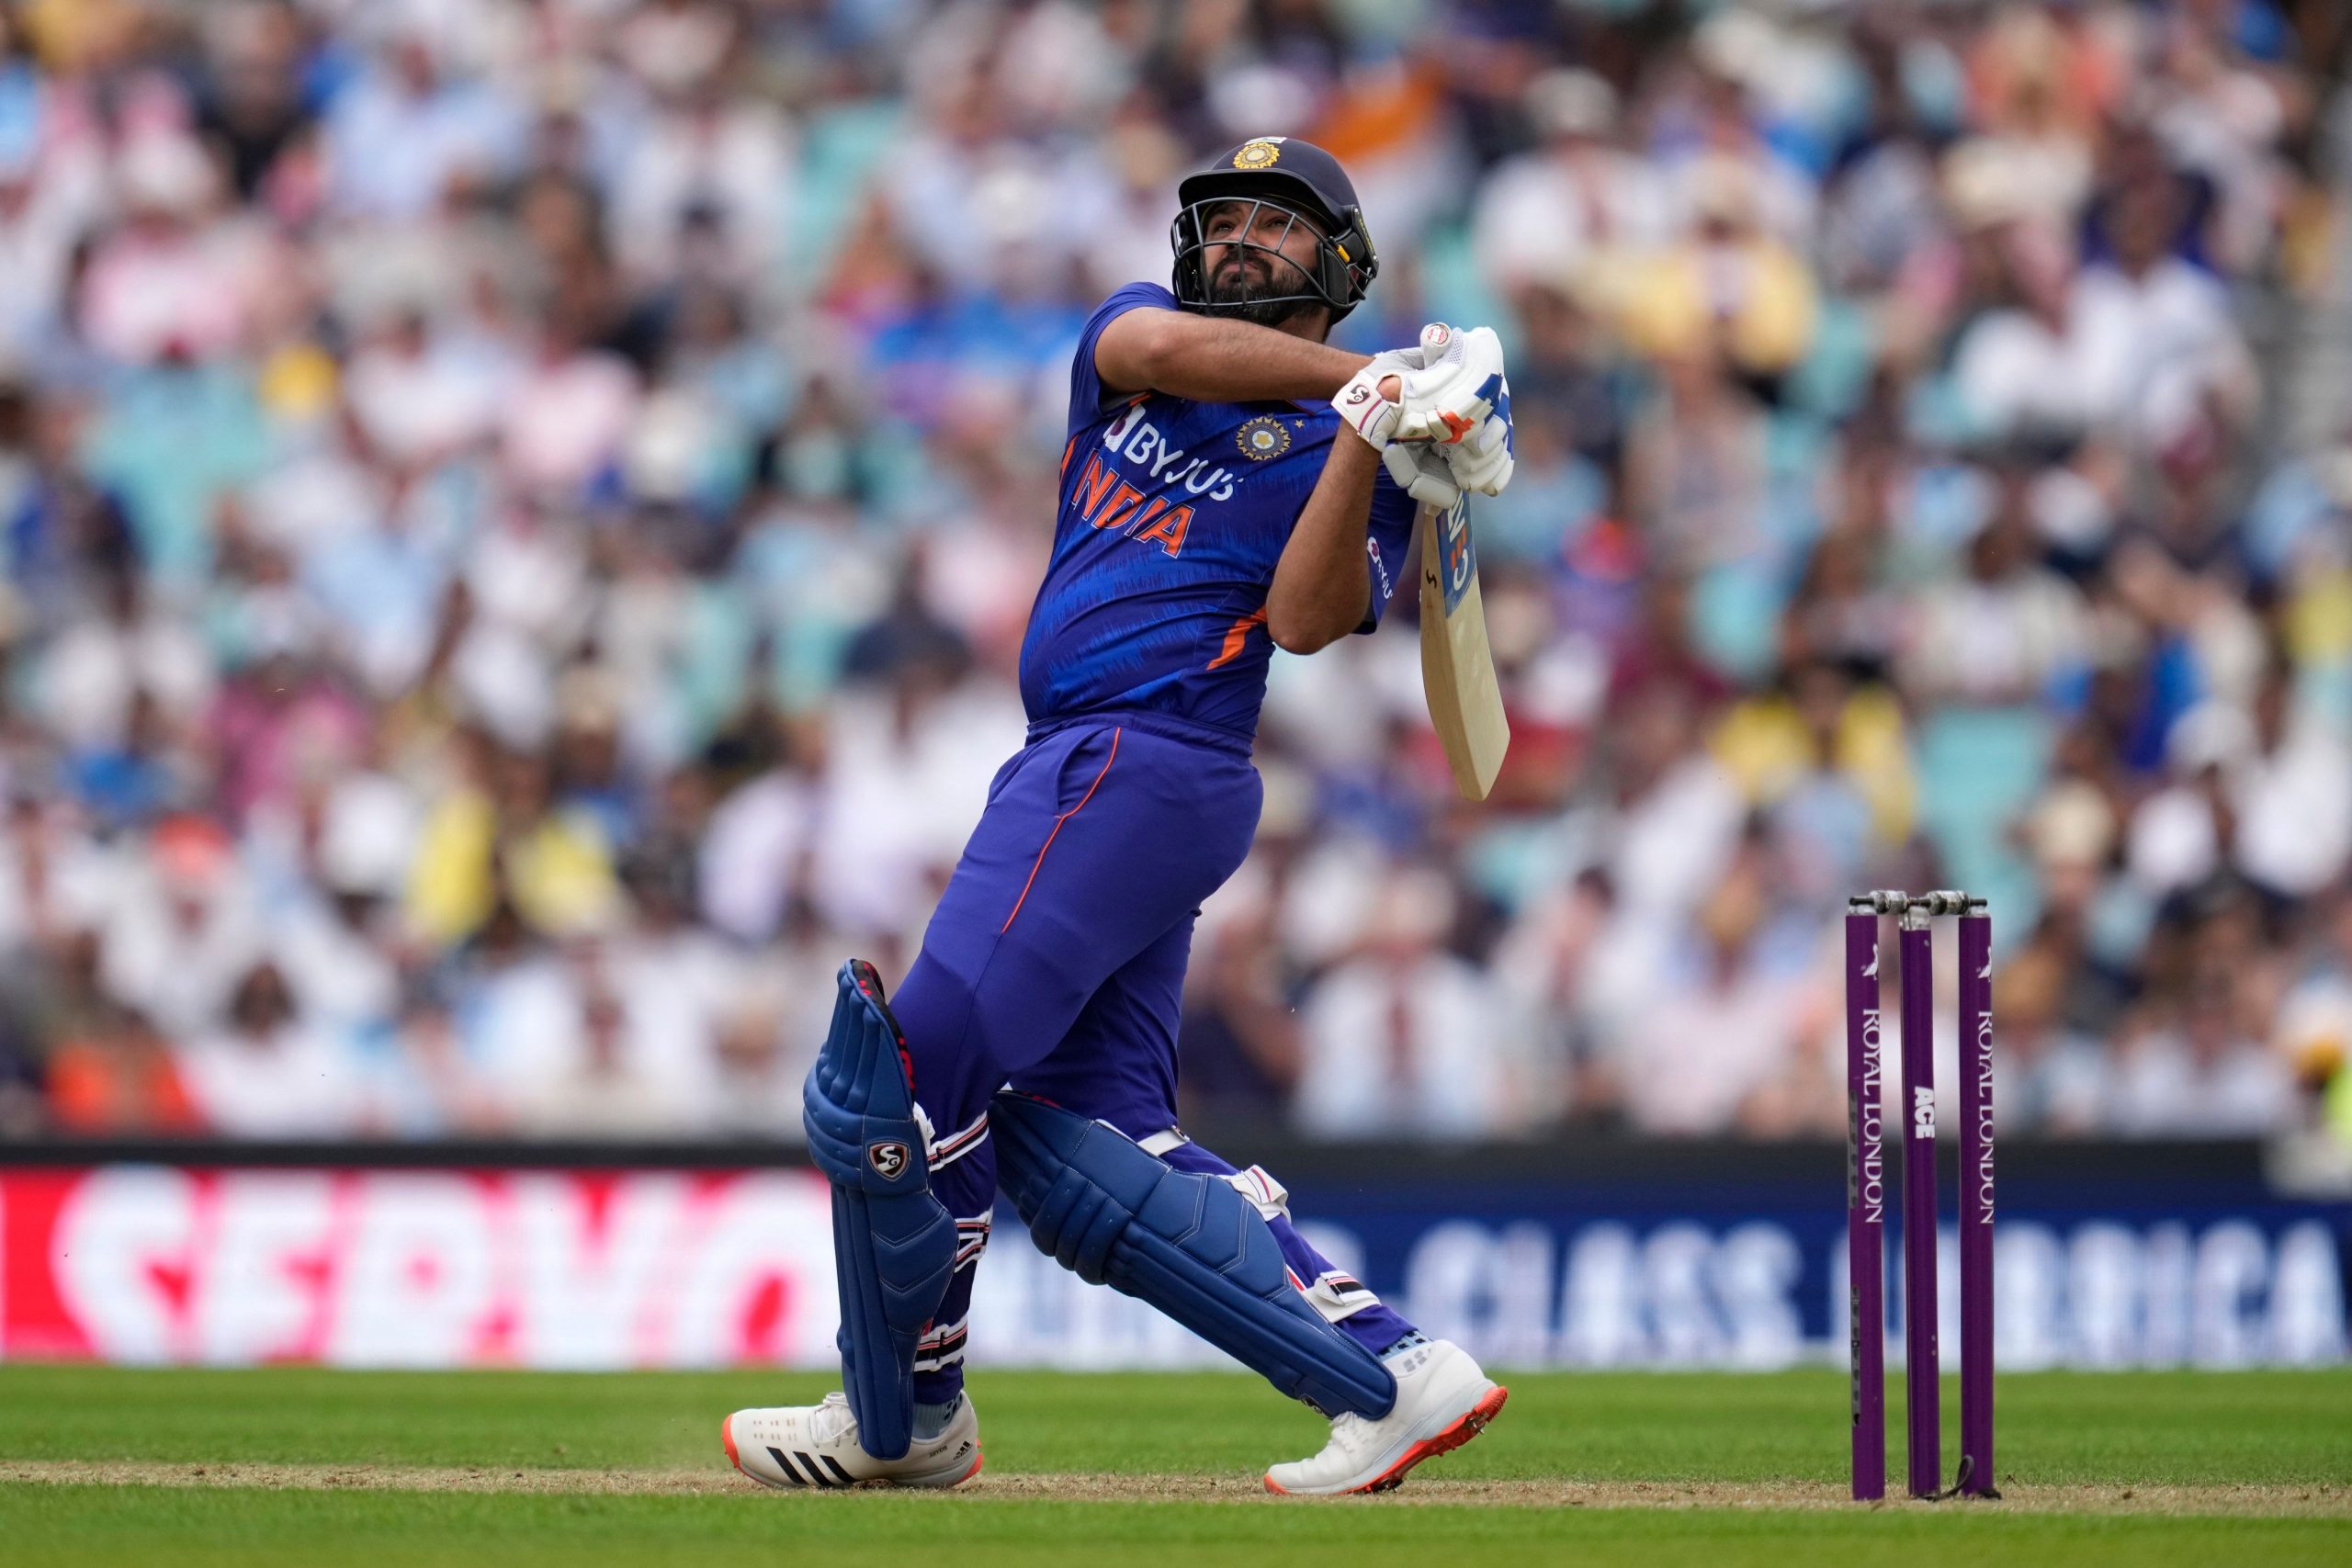 Rohit Sharma surpasses Micheal Bevan, misses out on Mohammed Azharuddins record